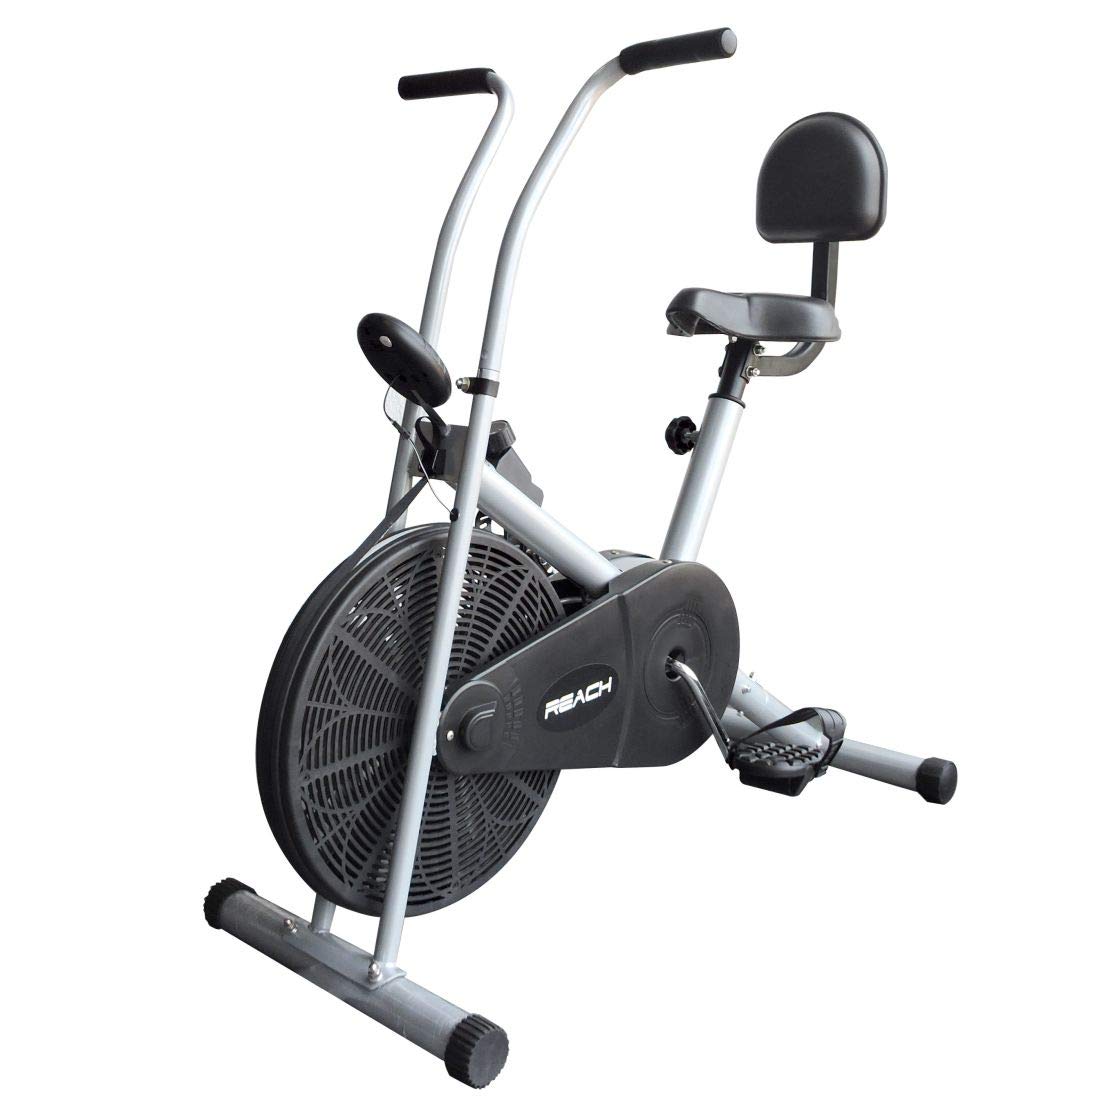 Reach AB-90 Air Bike Exercise Cycle Indoor Gym Equipment | Stationary Upright Exercise Bike for Fitness & Cardio Workouts | Suitable for Weight Loss Exercise with Adjustable Seat & Resistance